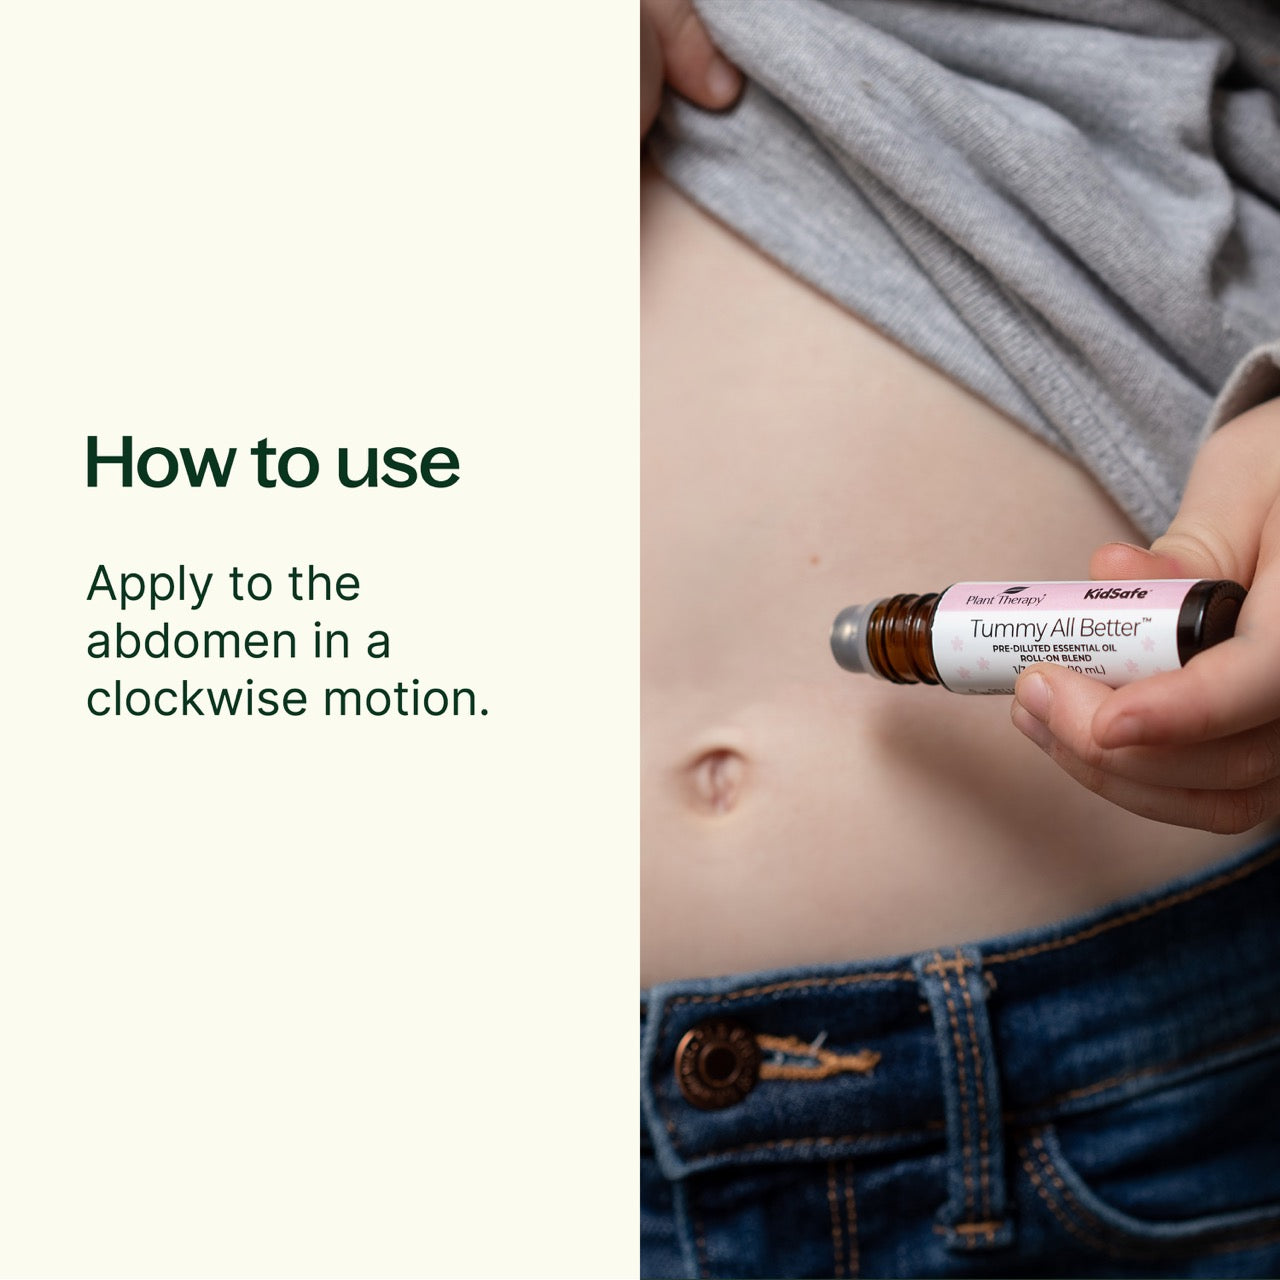 How to use Tummy All Better KidSafe Essential Oil Pre-Diluted Roll-On: Apply to the abdomen in a clockwise motion.